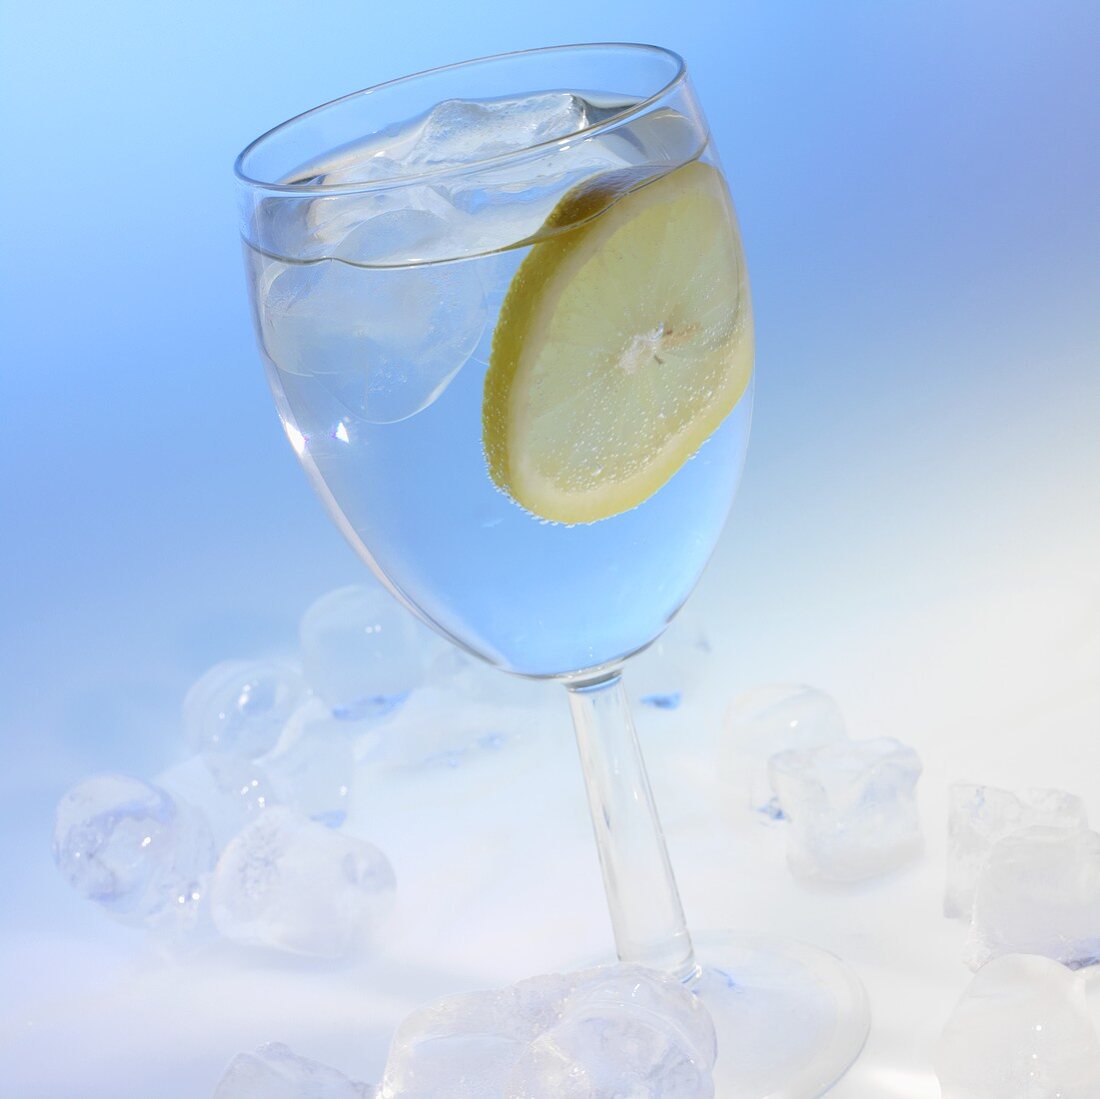 A glass of water with a slice of lemon and ice cubes